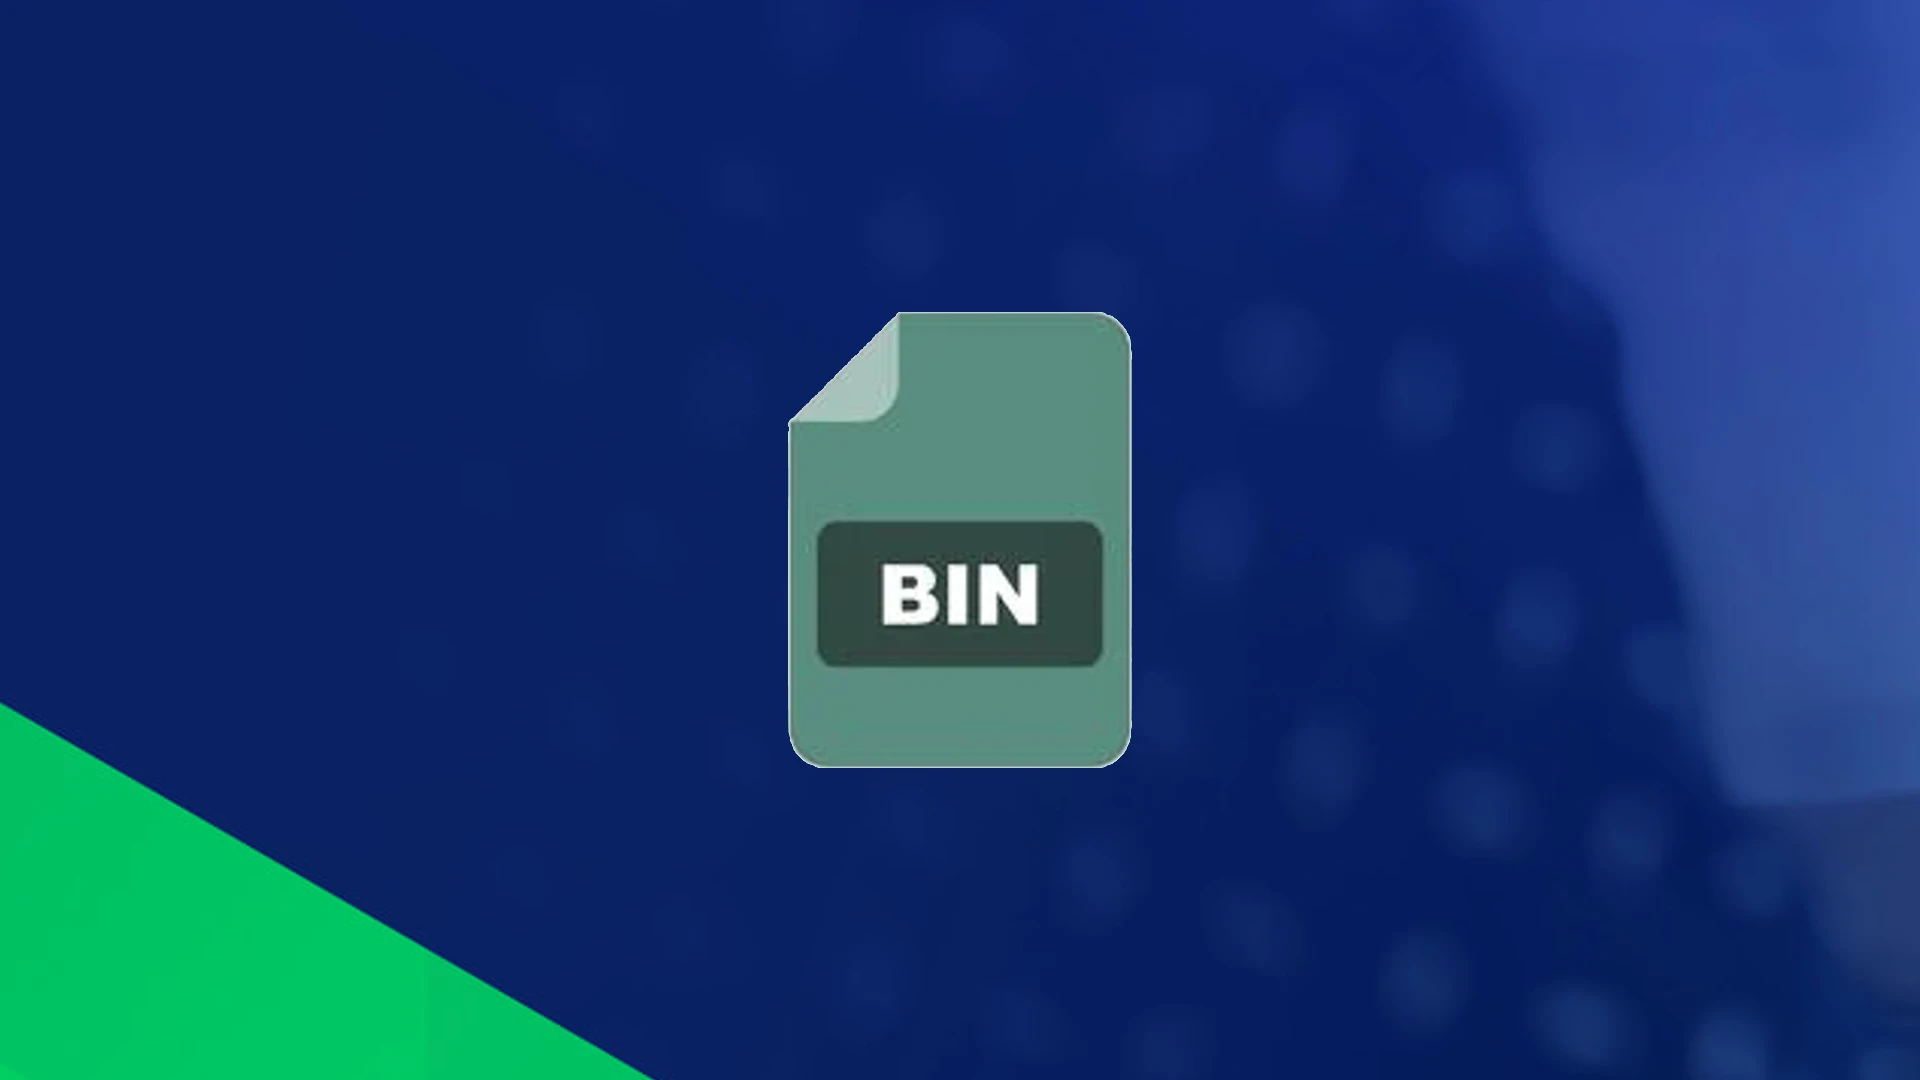 What Is A Bin File And How To Open It